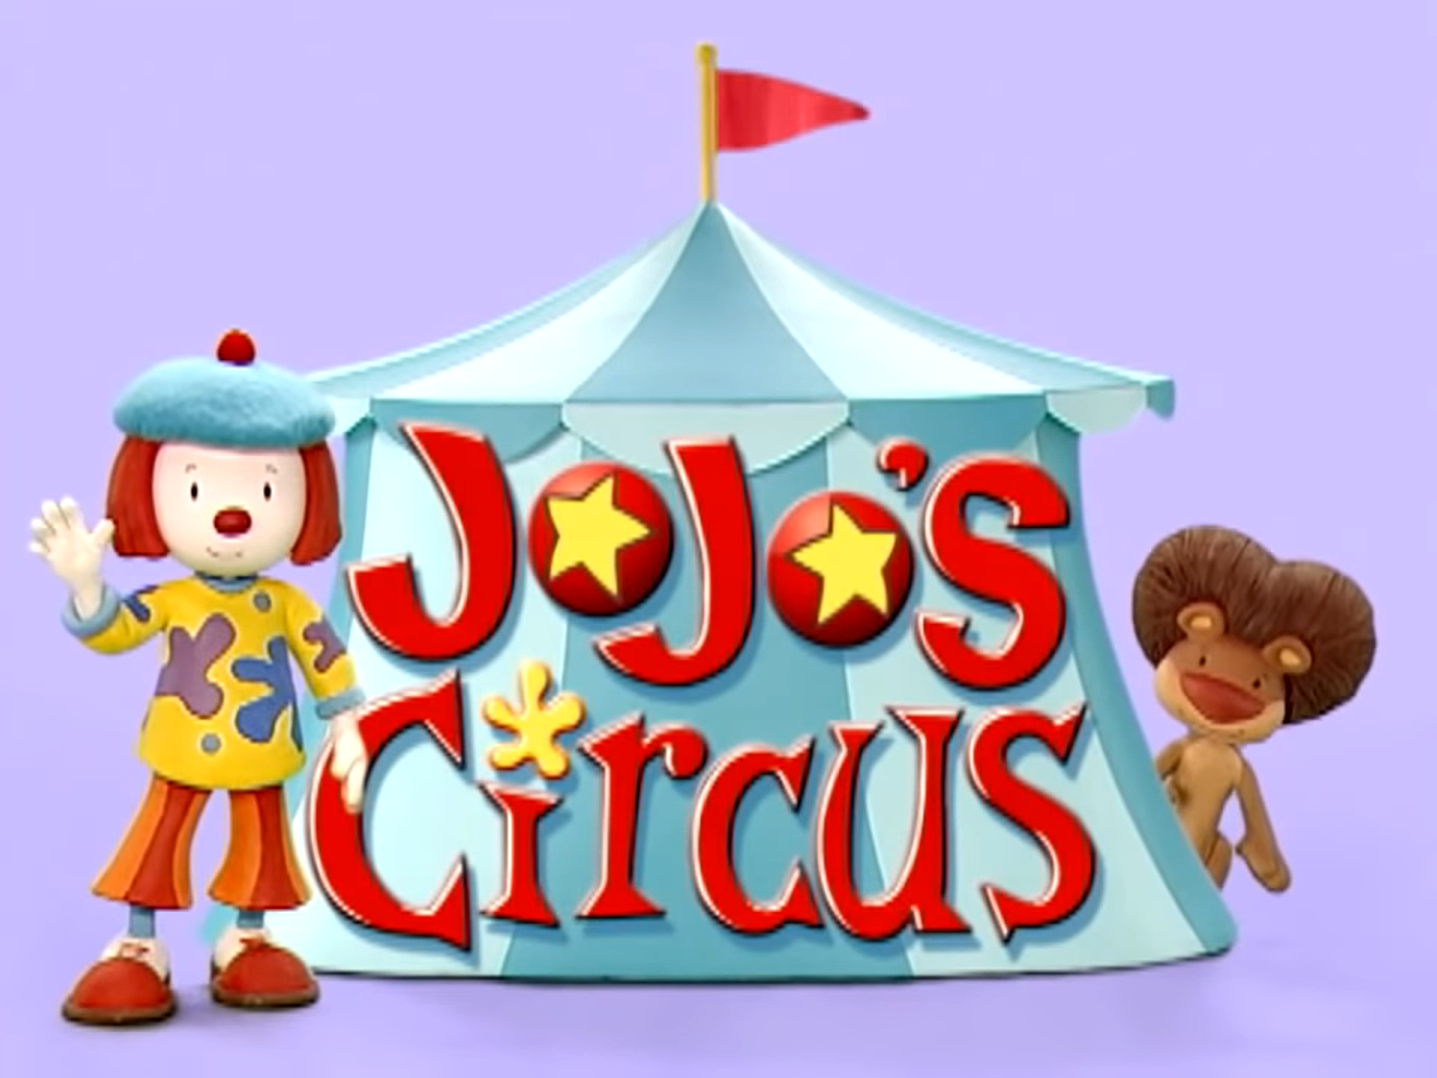 link=https://archive.org/details/jo-jos-circus-episodes-cdcb/JoJo's+Circus+212+100+Days+and+Counting;+Hoop+Happy+[CDCB].mpg